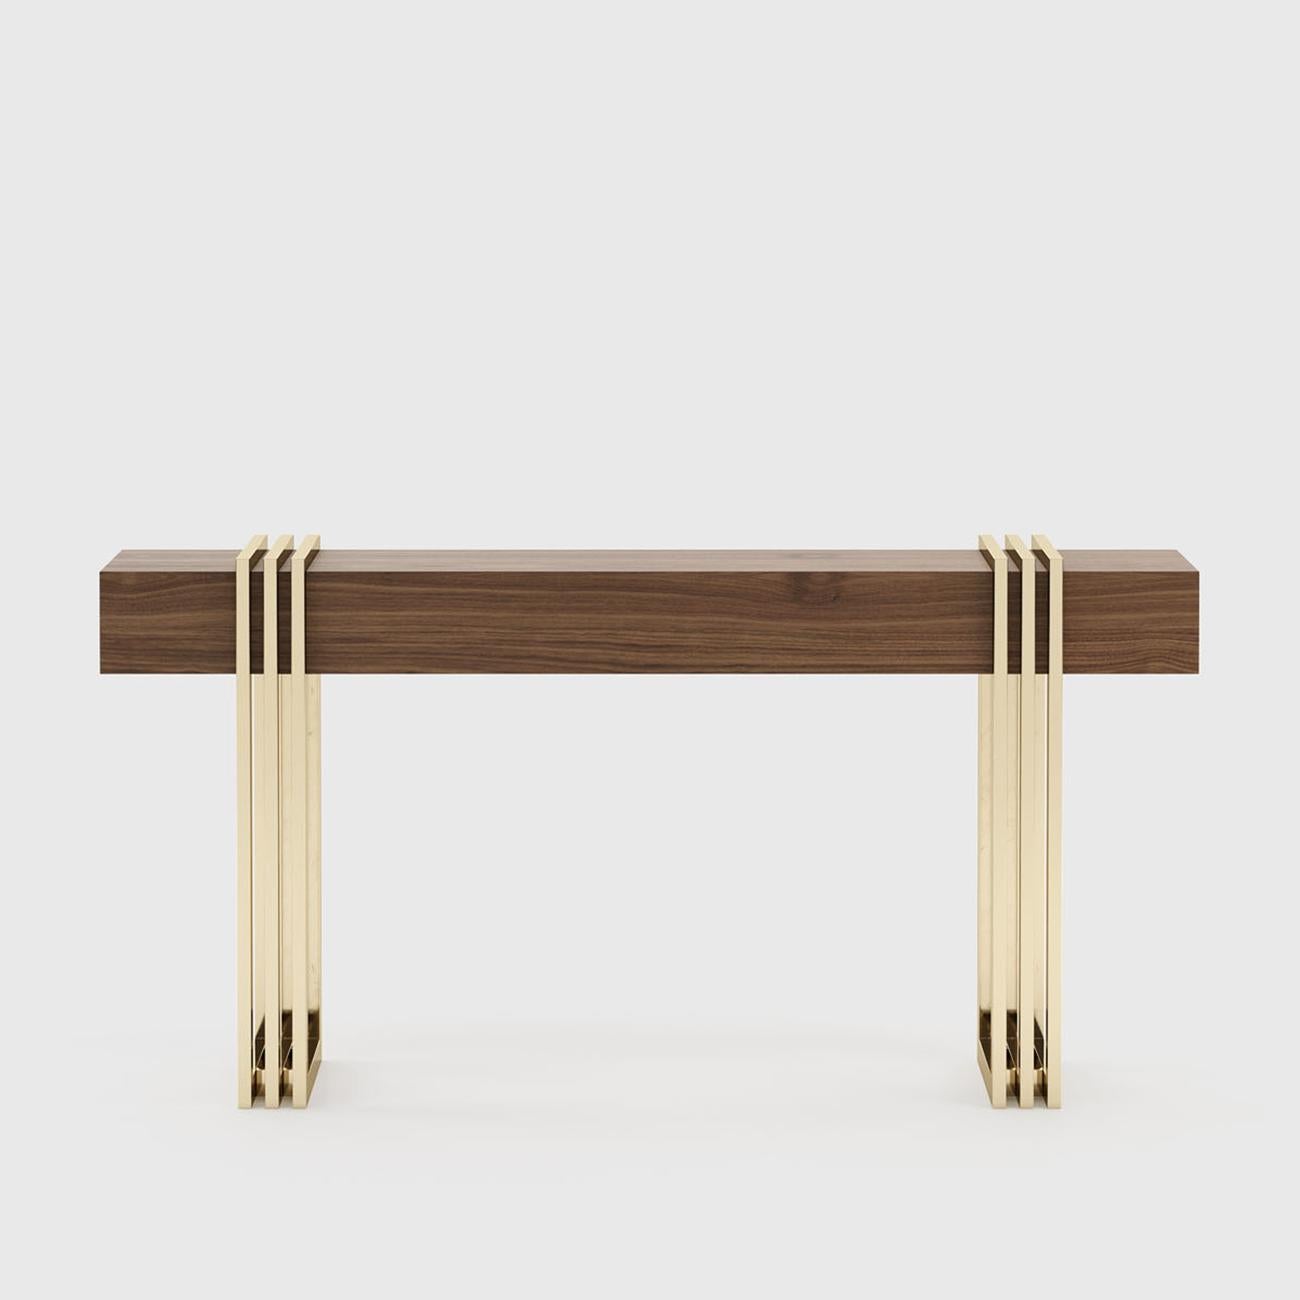 Console table reed walnut in walnut wood in matte finish.
With 1 drawer. Feet in polished stainless steel in gold finish.